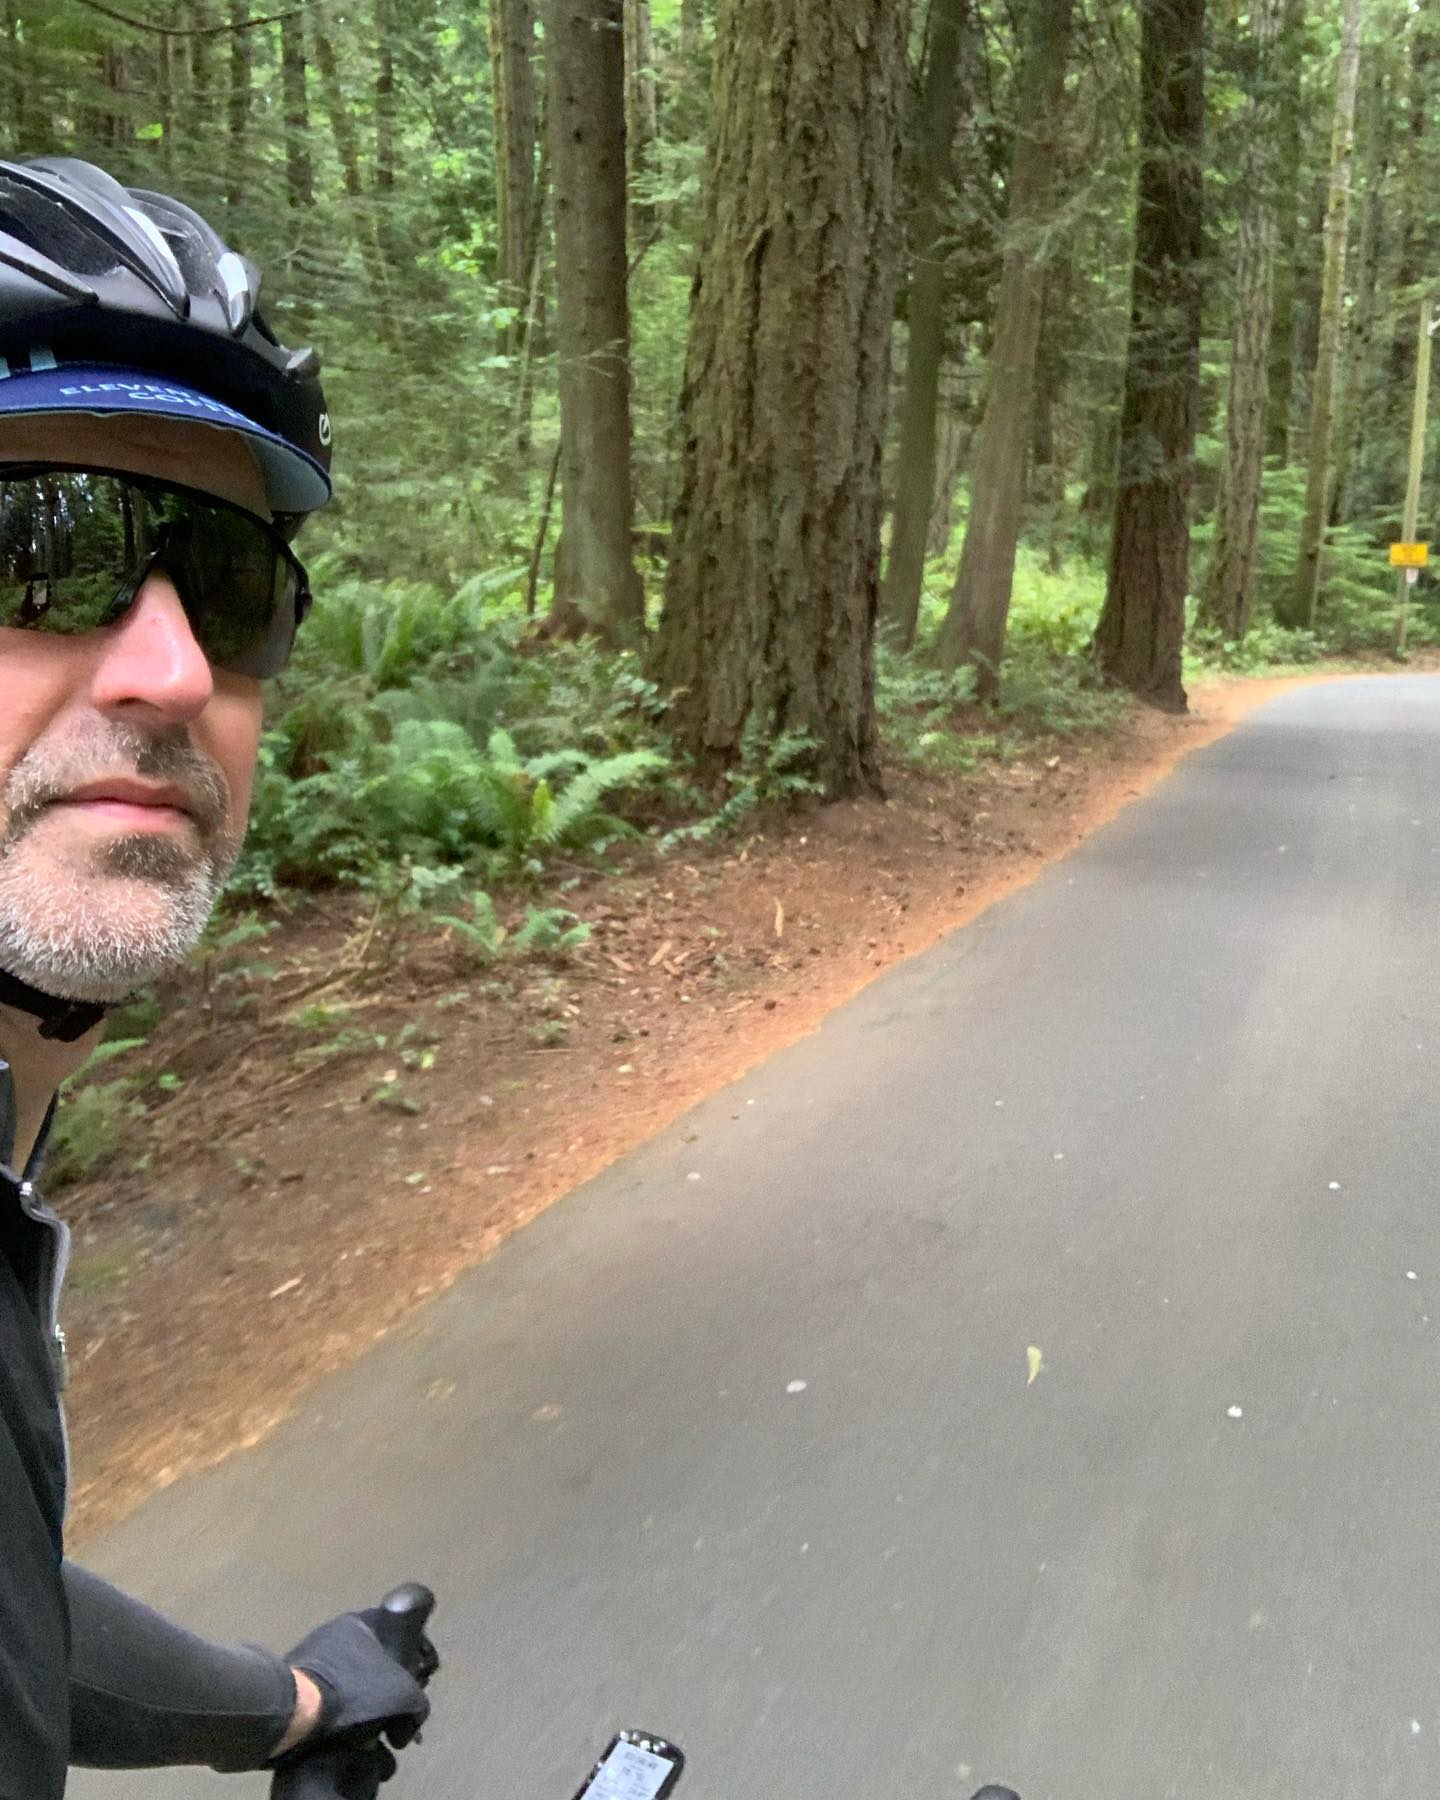 Doing my best @trekprocity #dangerselfie while on the descent through Royal Roads. Definitely not watching where I’m going like @scottrmitchell does. #cycling #yyj #bikesarefun #selfie #cyclingselfie